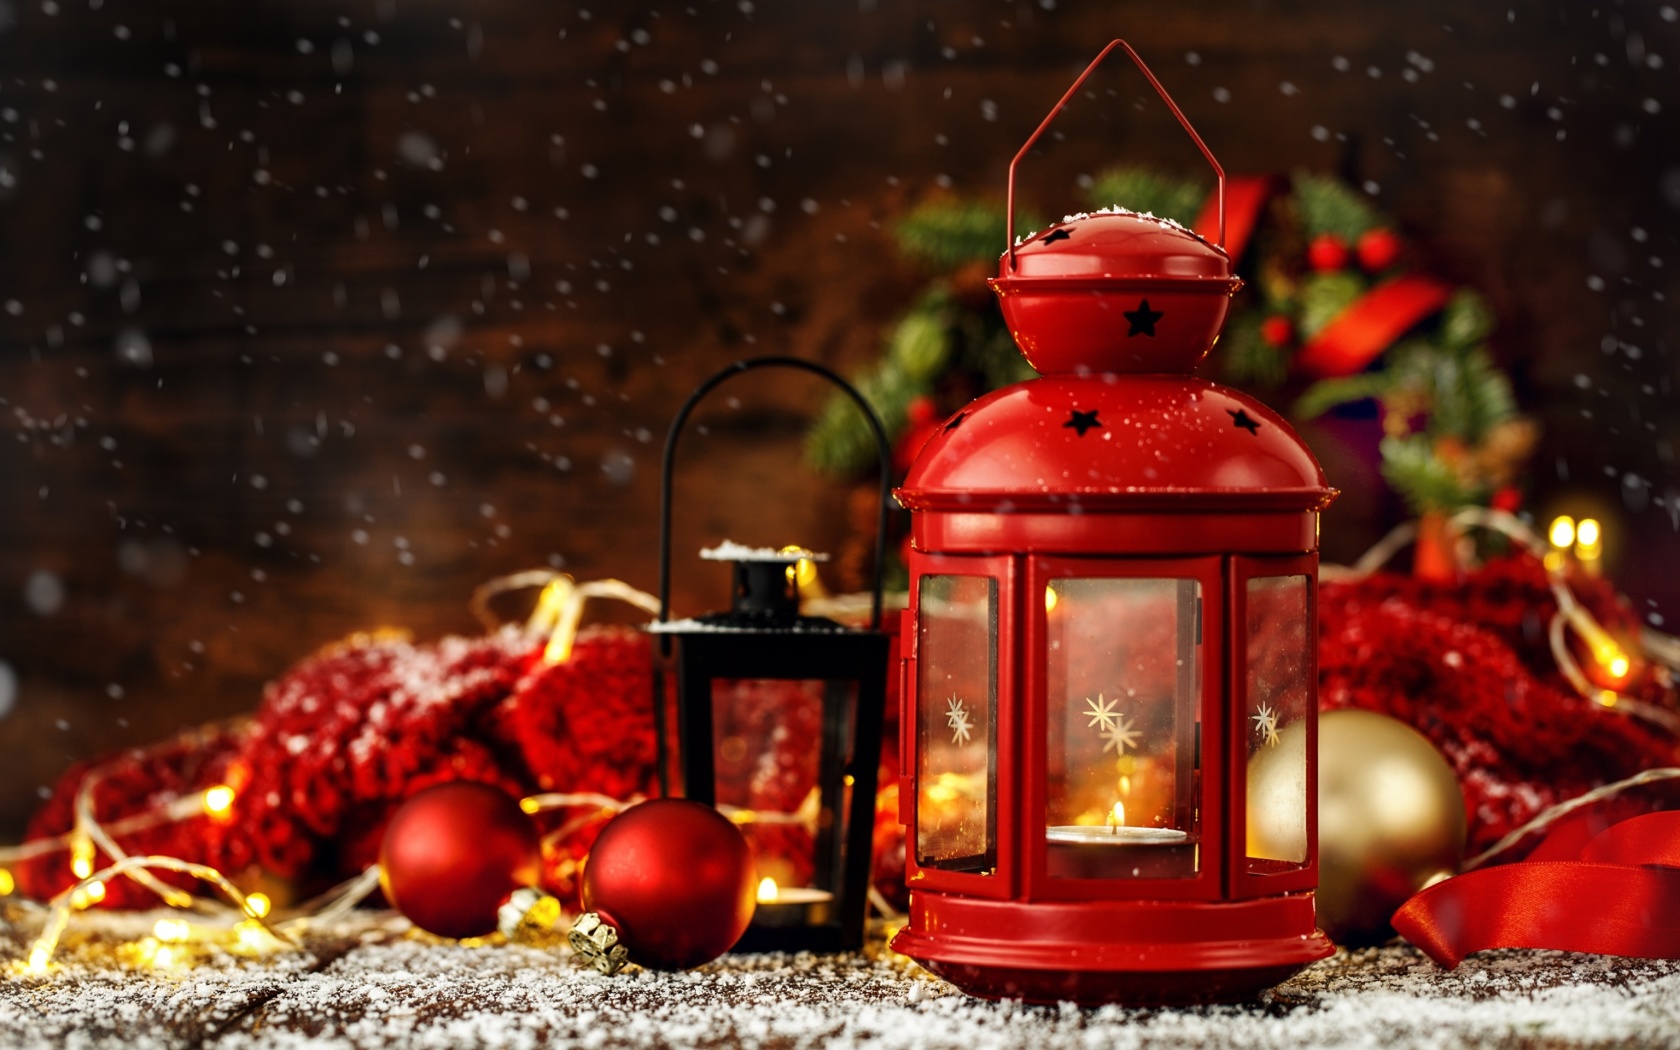 Christmas candles with holiday decor wallpaper 1680x1050